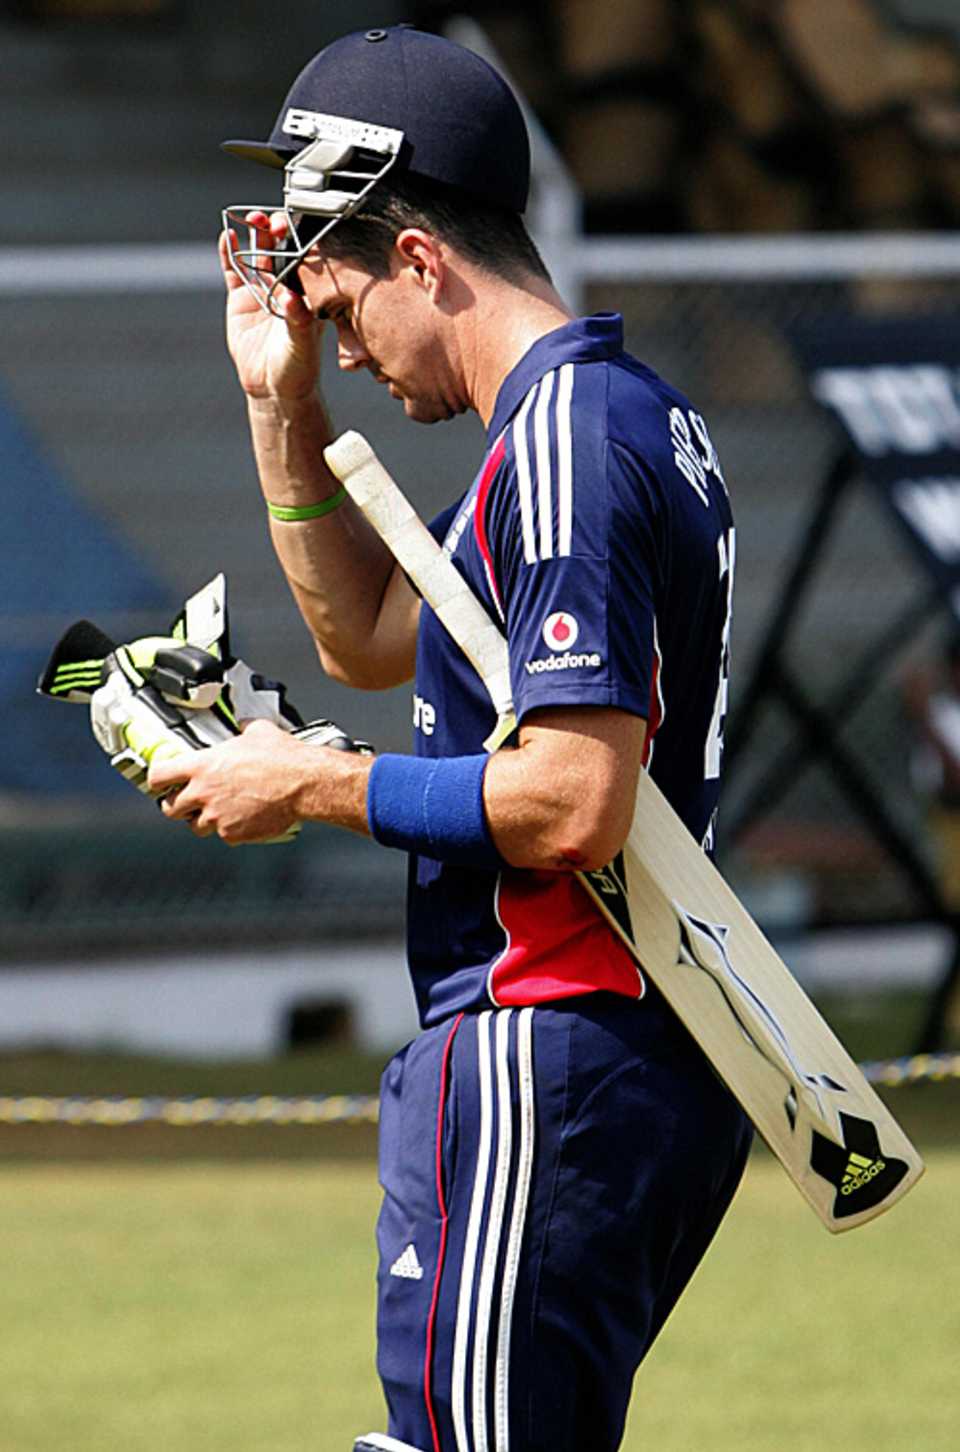 Kevin Pietersen trudges off for a duck